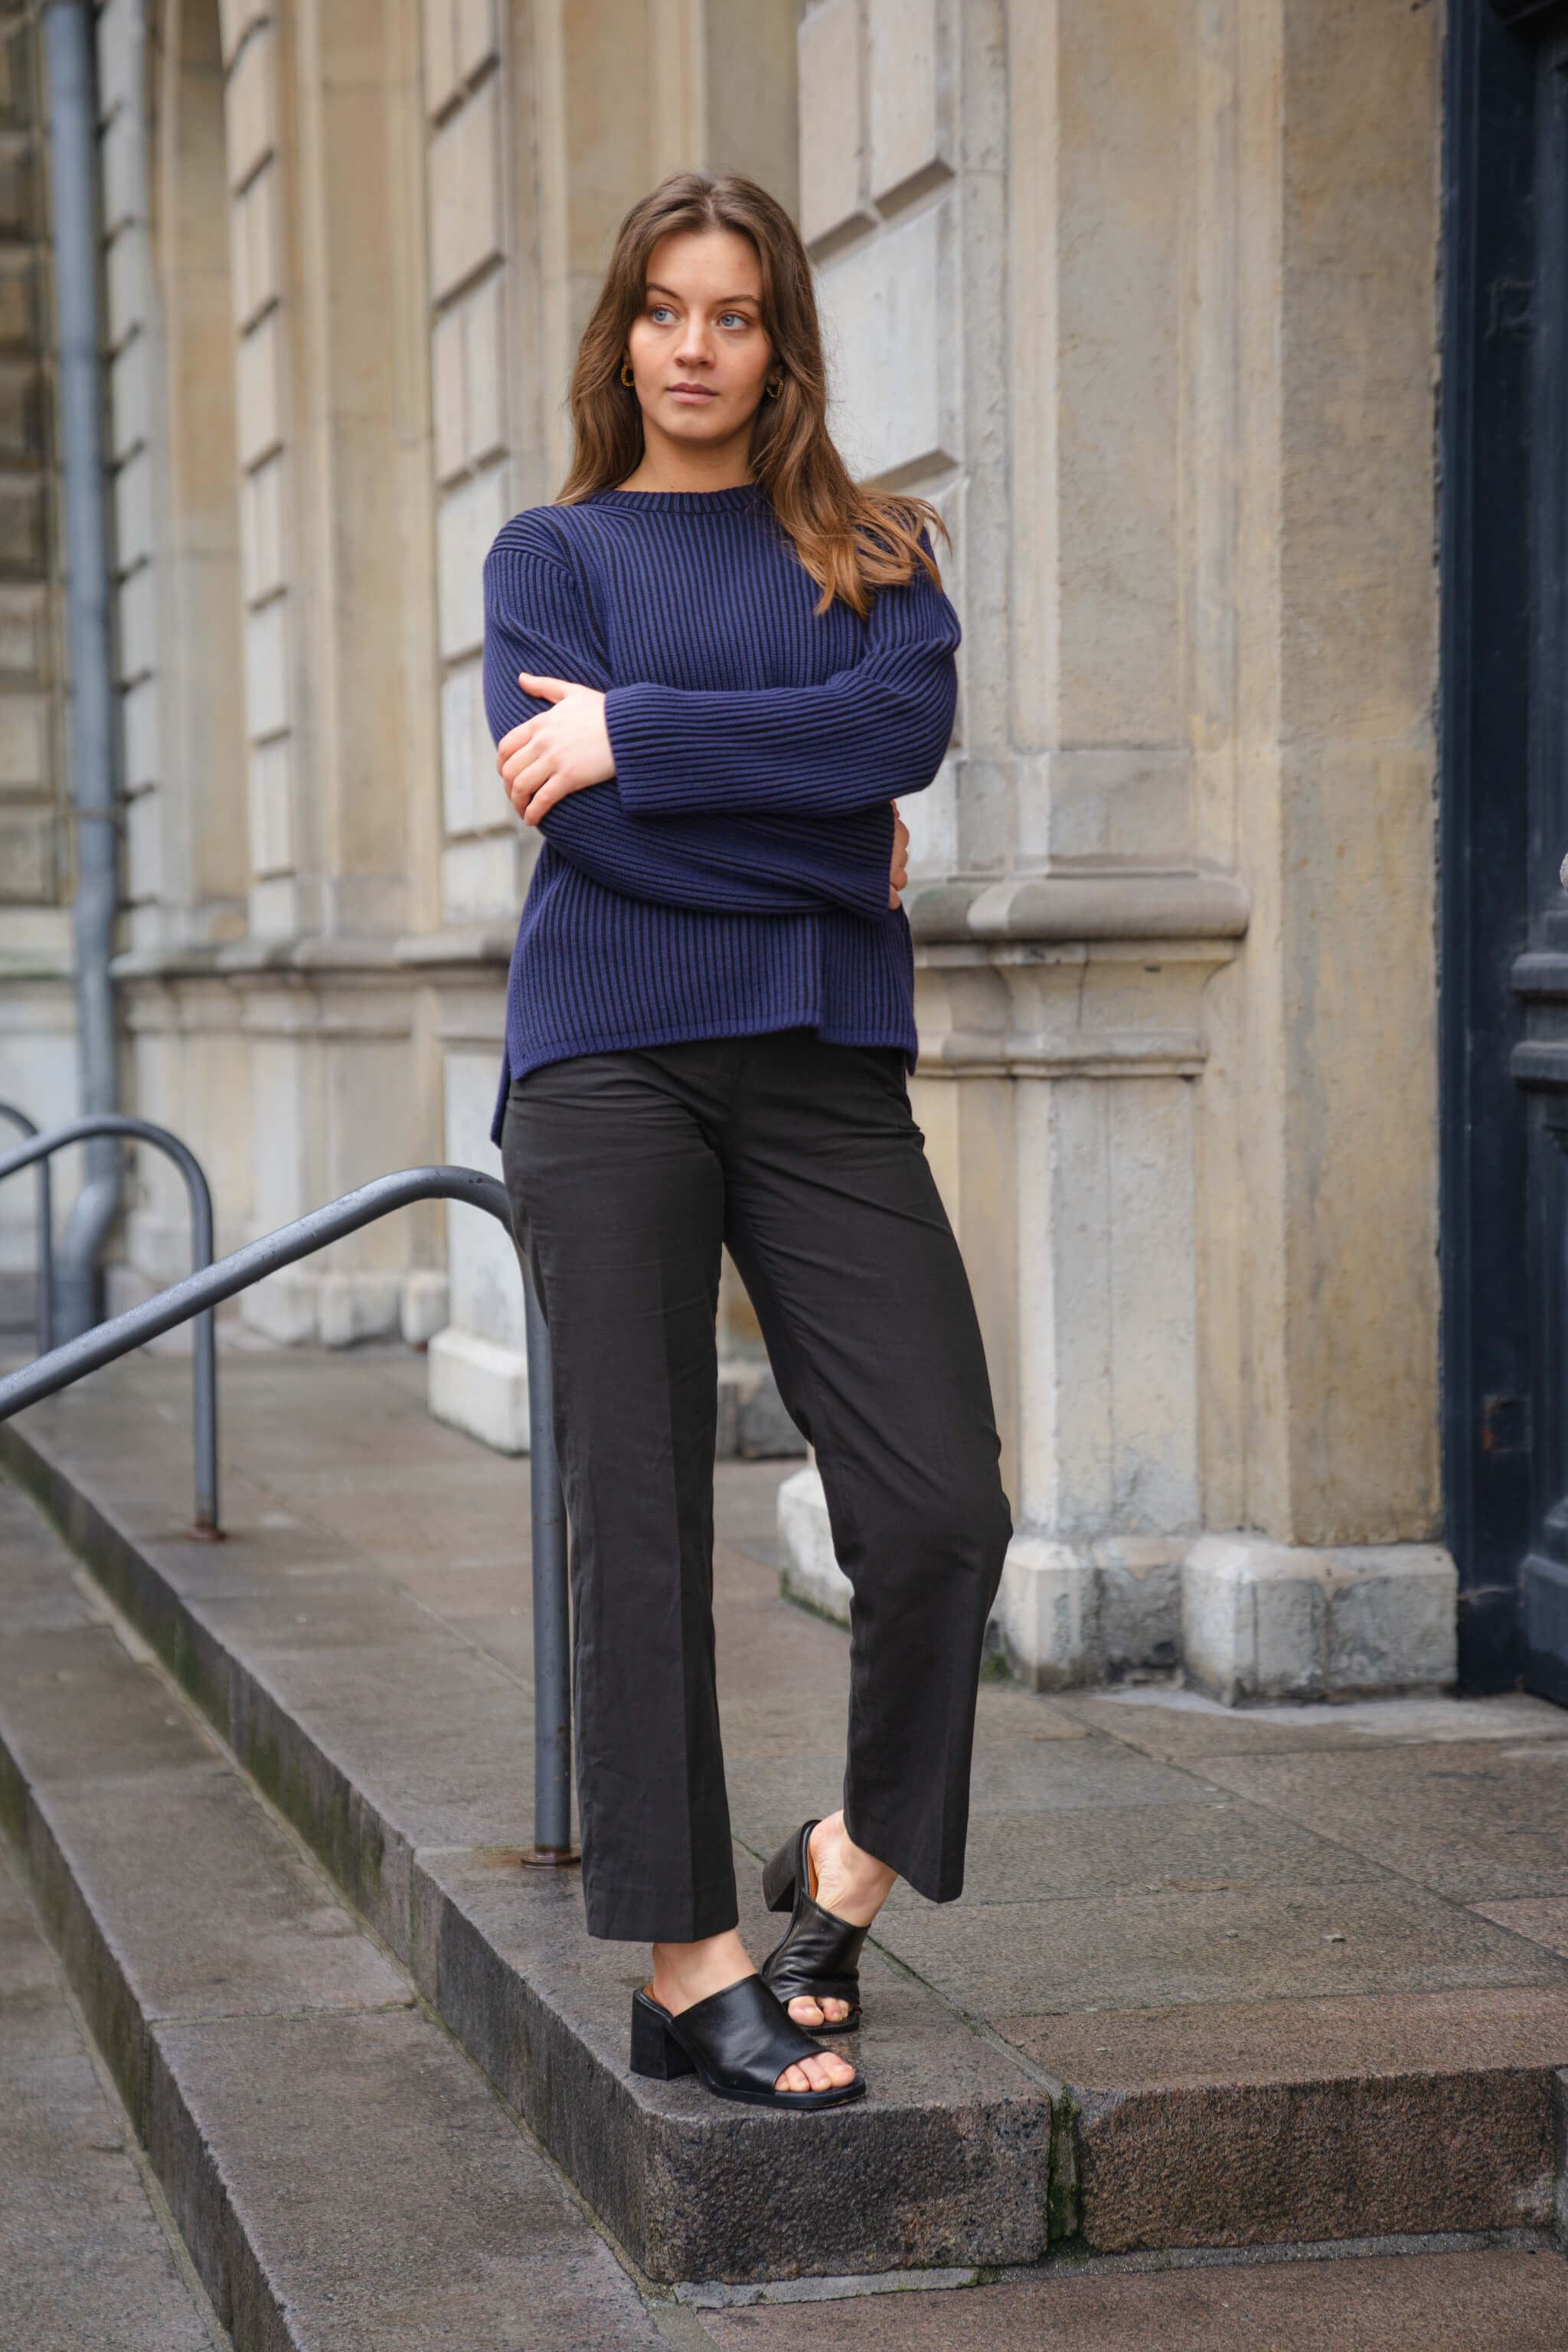 Fashion-forward look from Cyme Copenhagen, featuring a model in a deep blue ribbed jumper paired with tailored black ankle trousers and open-toe slides, reflecting the brand's dedication to crafting top fashion women's clothes with a nod to sustainable Danish design.